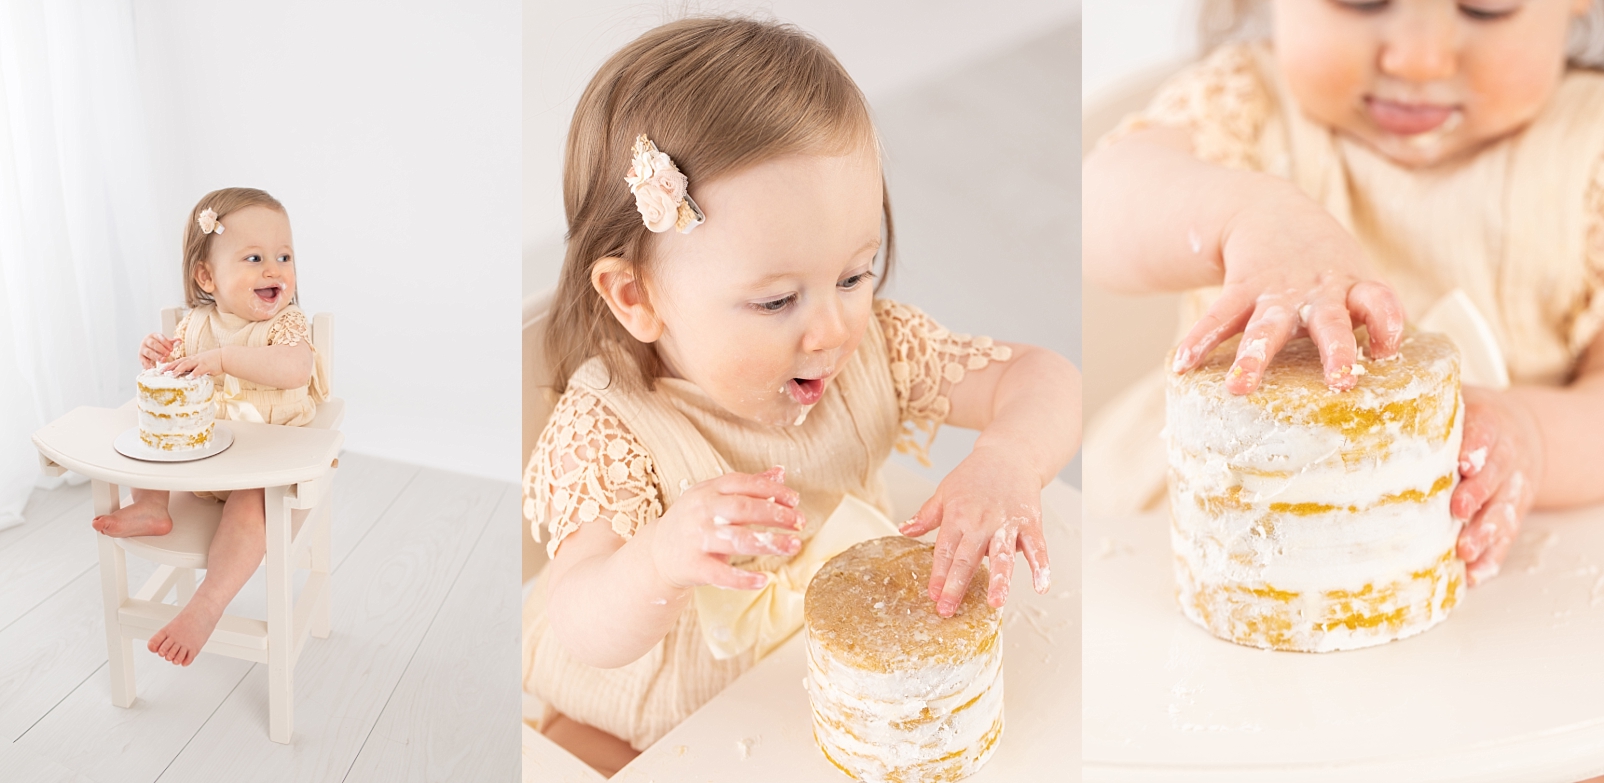 Cake Smash photos of a baby girl eating a small white icing cake | How to Choose a Smash Cake

